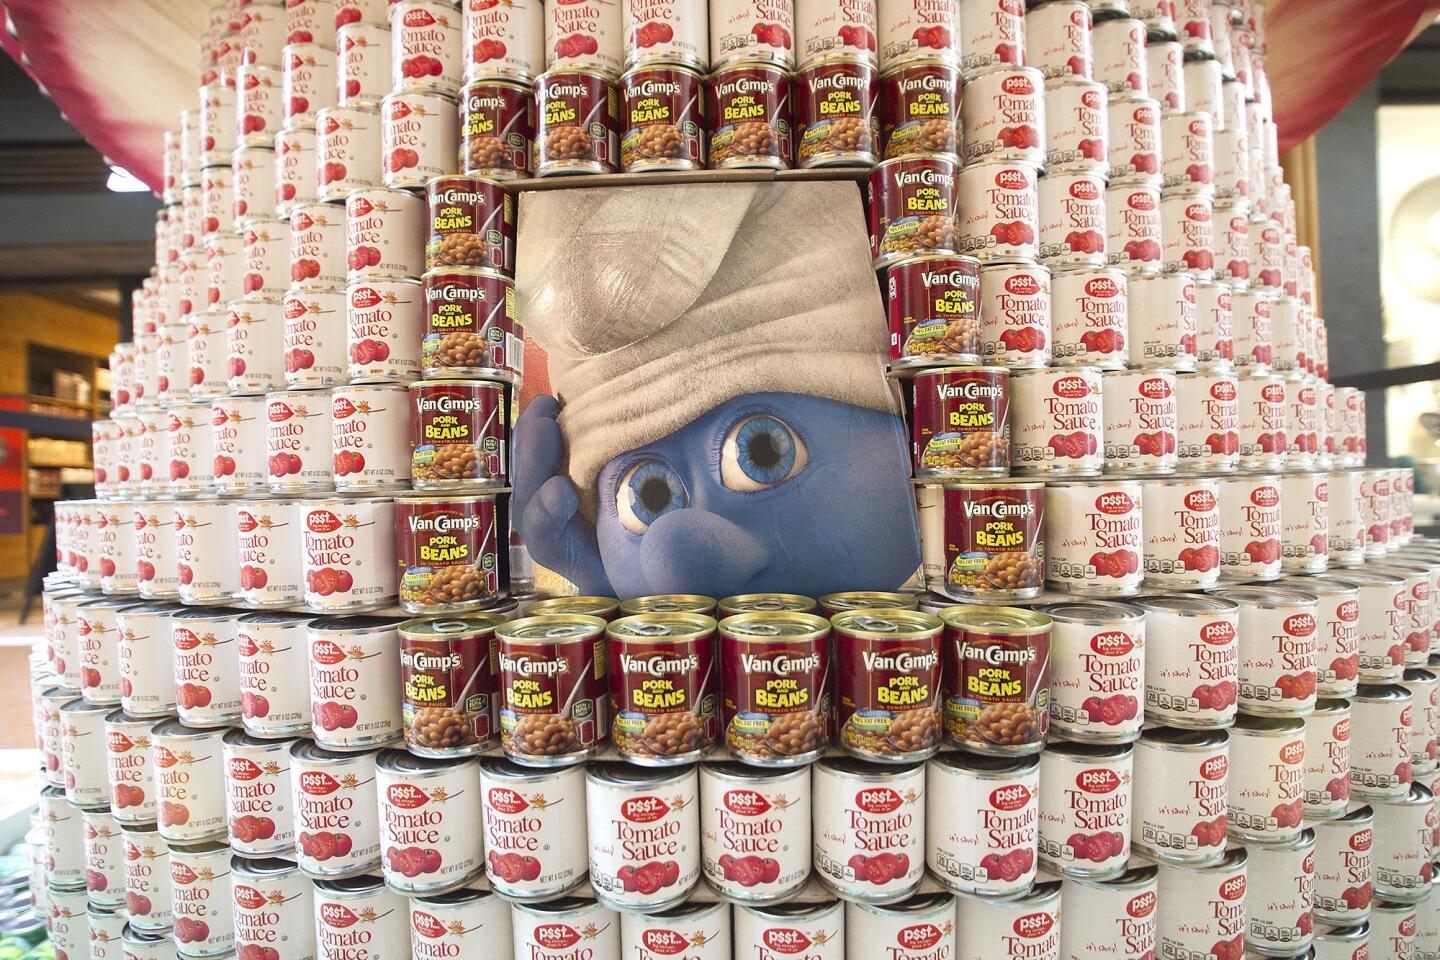 McCarthy's "World Hunger - Nothing to Smurf About" themed entry shows a Smurf looking through a window among thousands of cans during the 10th annual Canstruction design and build event at South Coast Plaza in Costa Mesa.